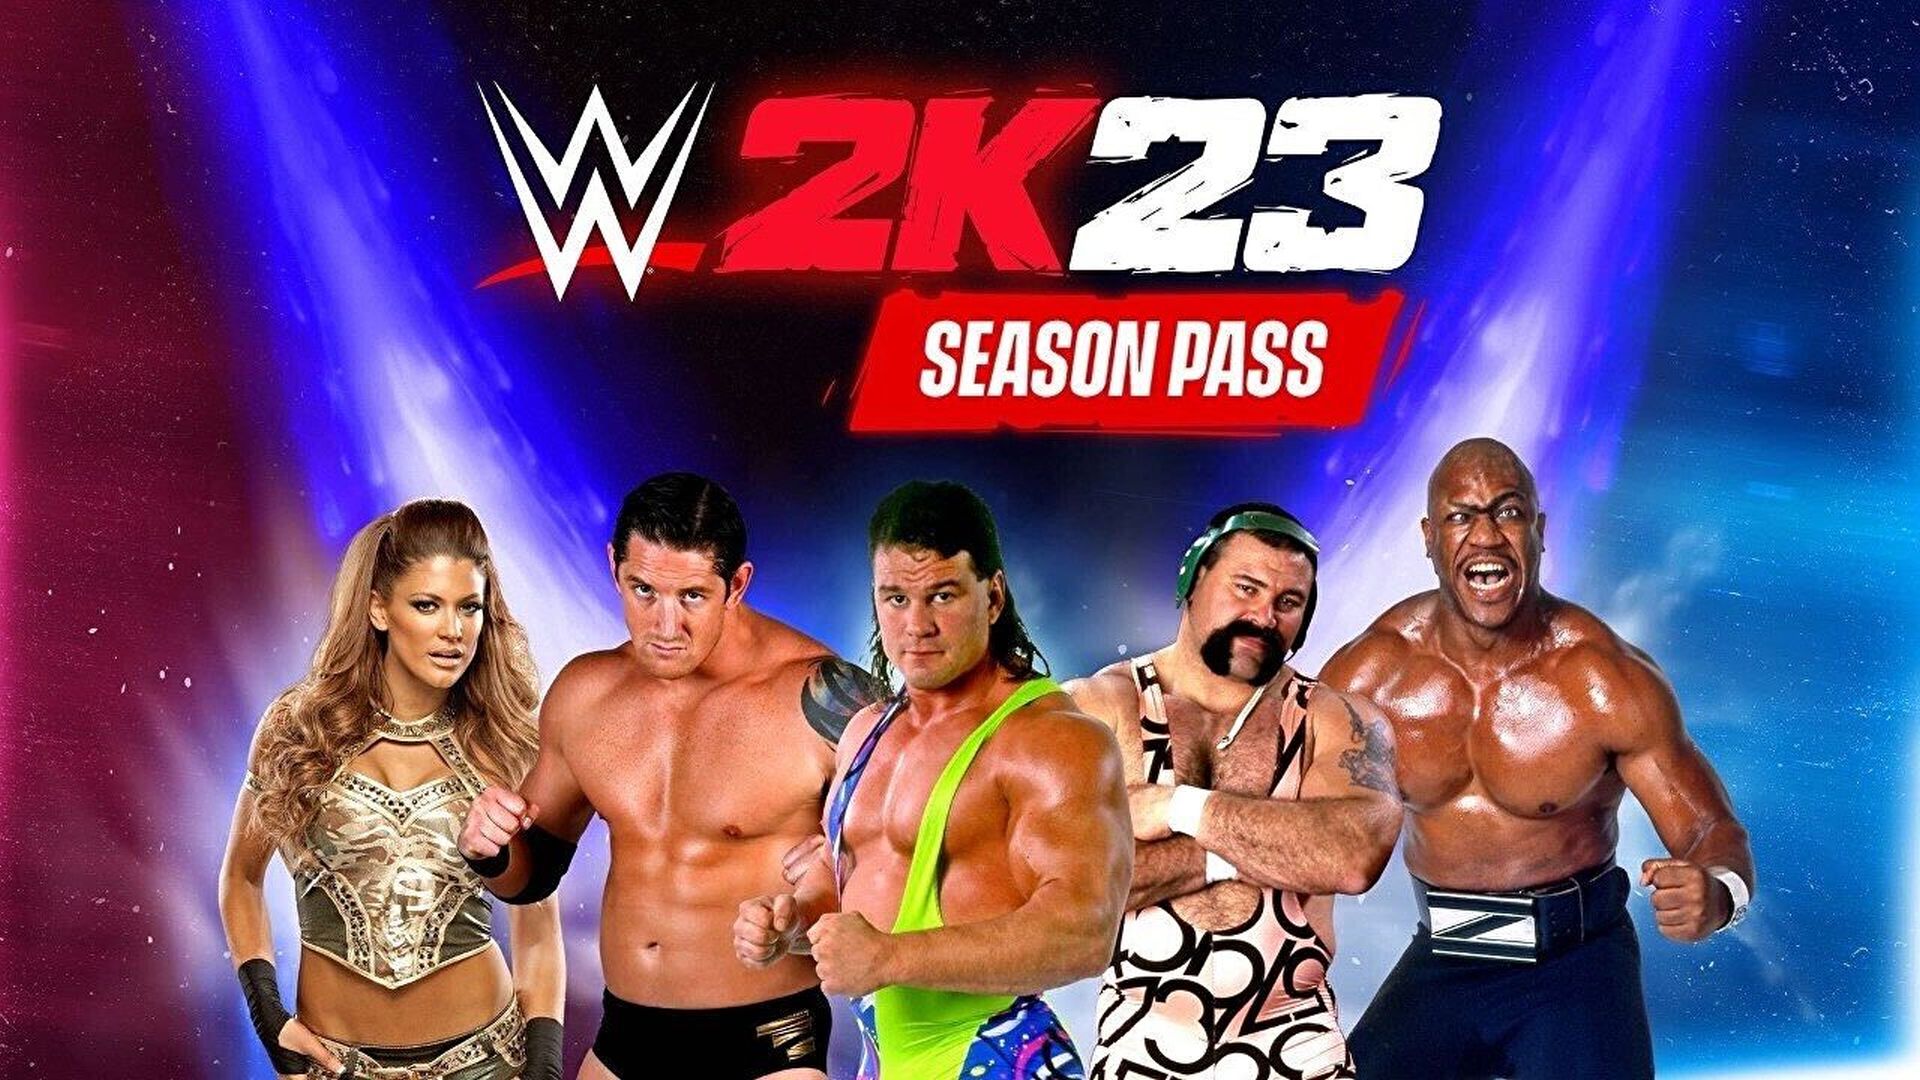 WWE 2K23 Season Pass Revealed; Adds the Steiner Brothers,
Bray Wyatt, Eve Torres, and More